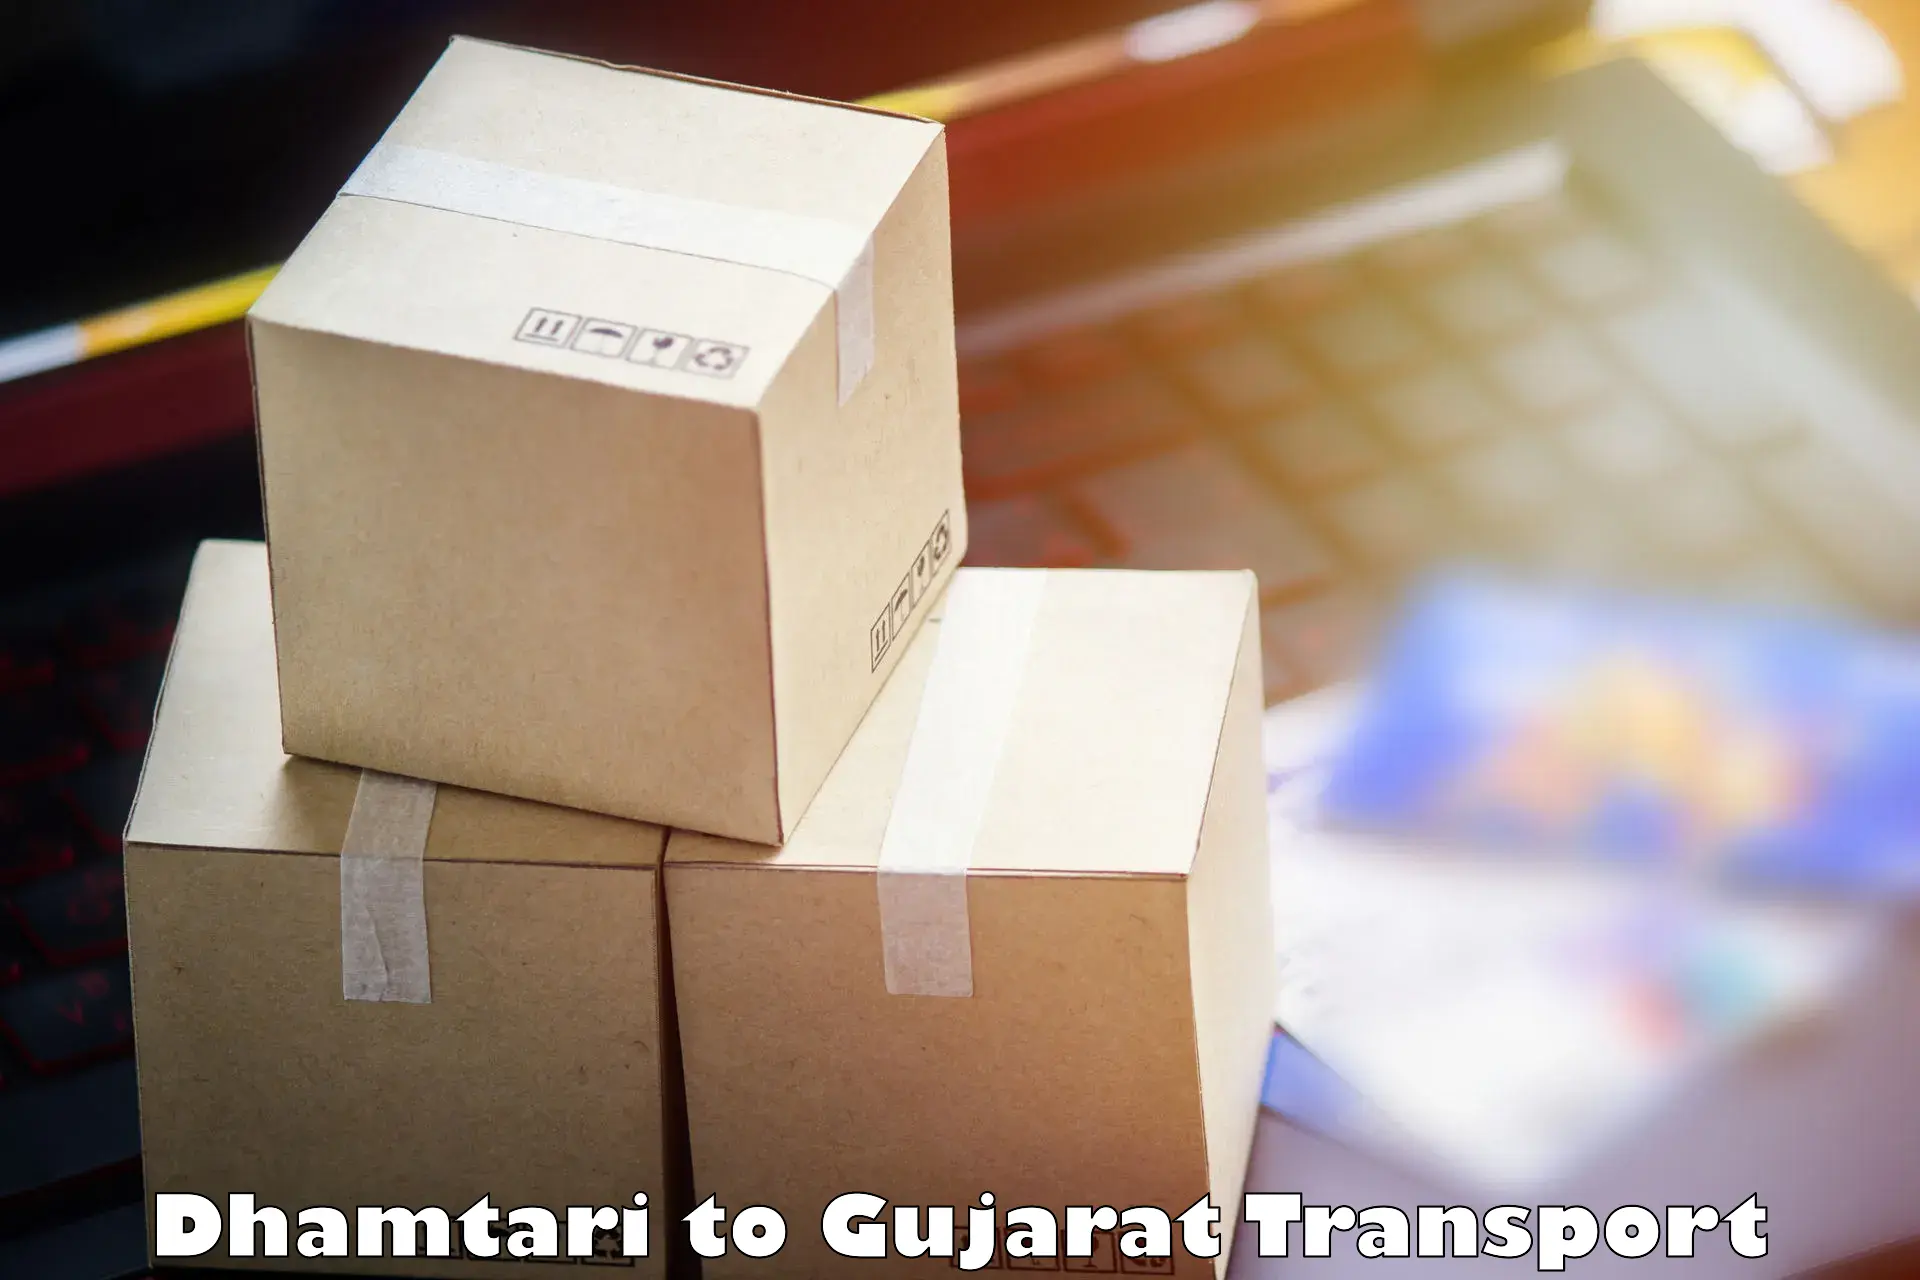 Container transport service Dhamtari to Mehsana